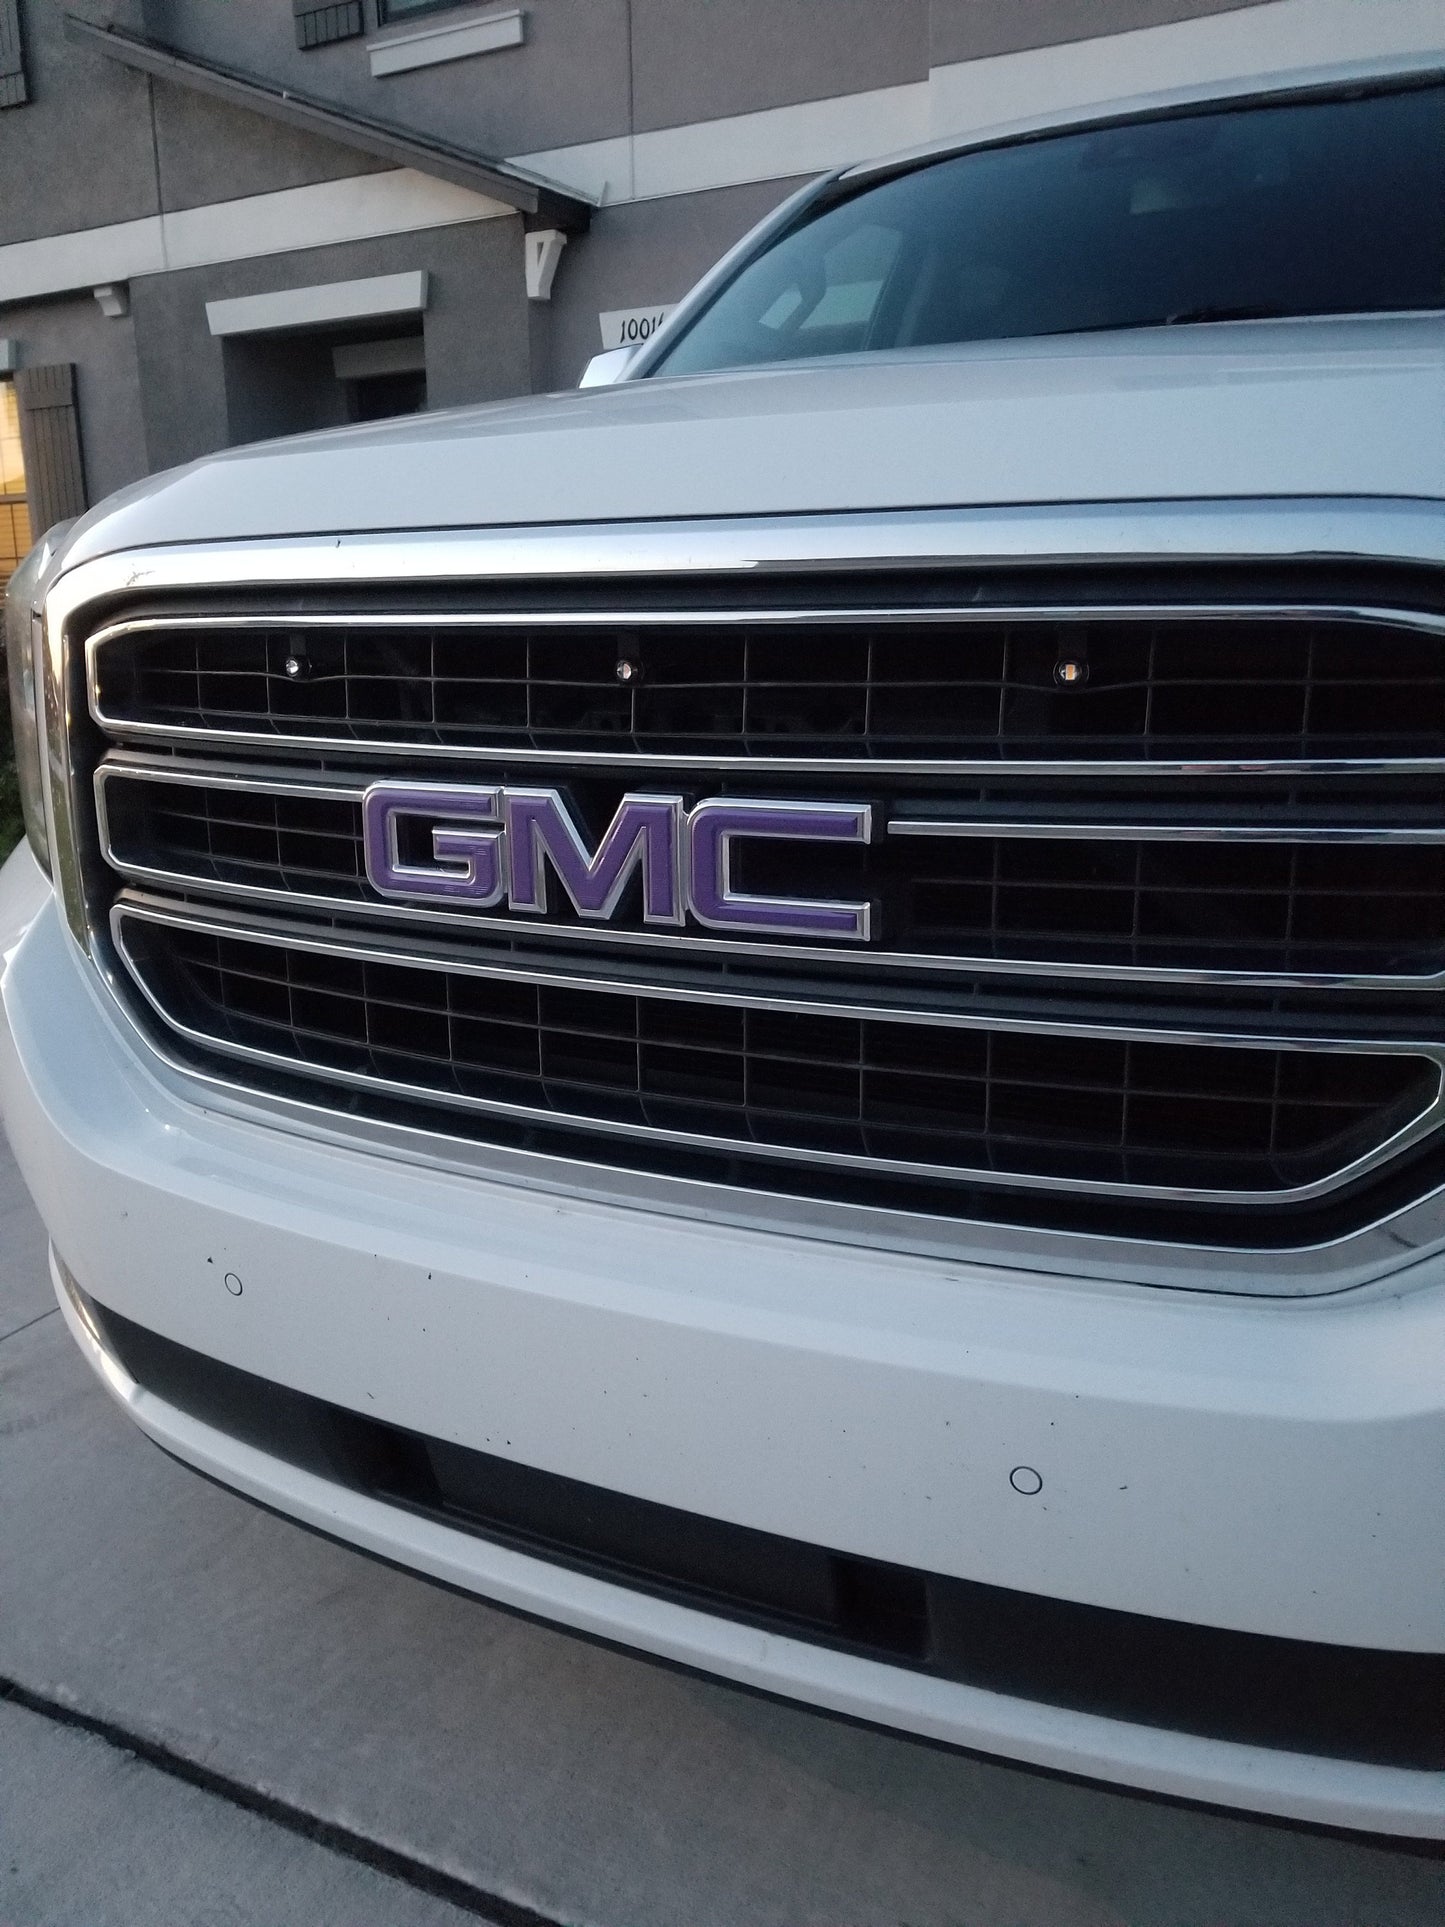 2015-2020 YUKON Precut Overlay DECALS Compatible With GMC Emblems | Front & Rear Set